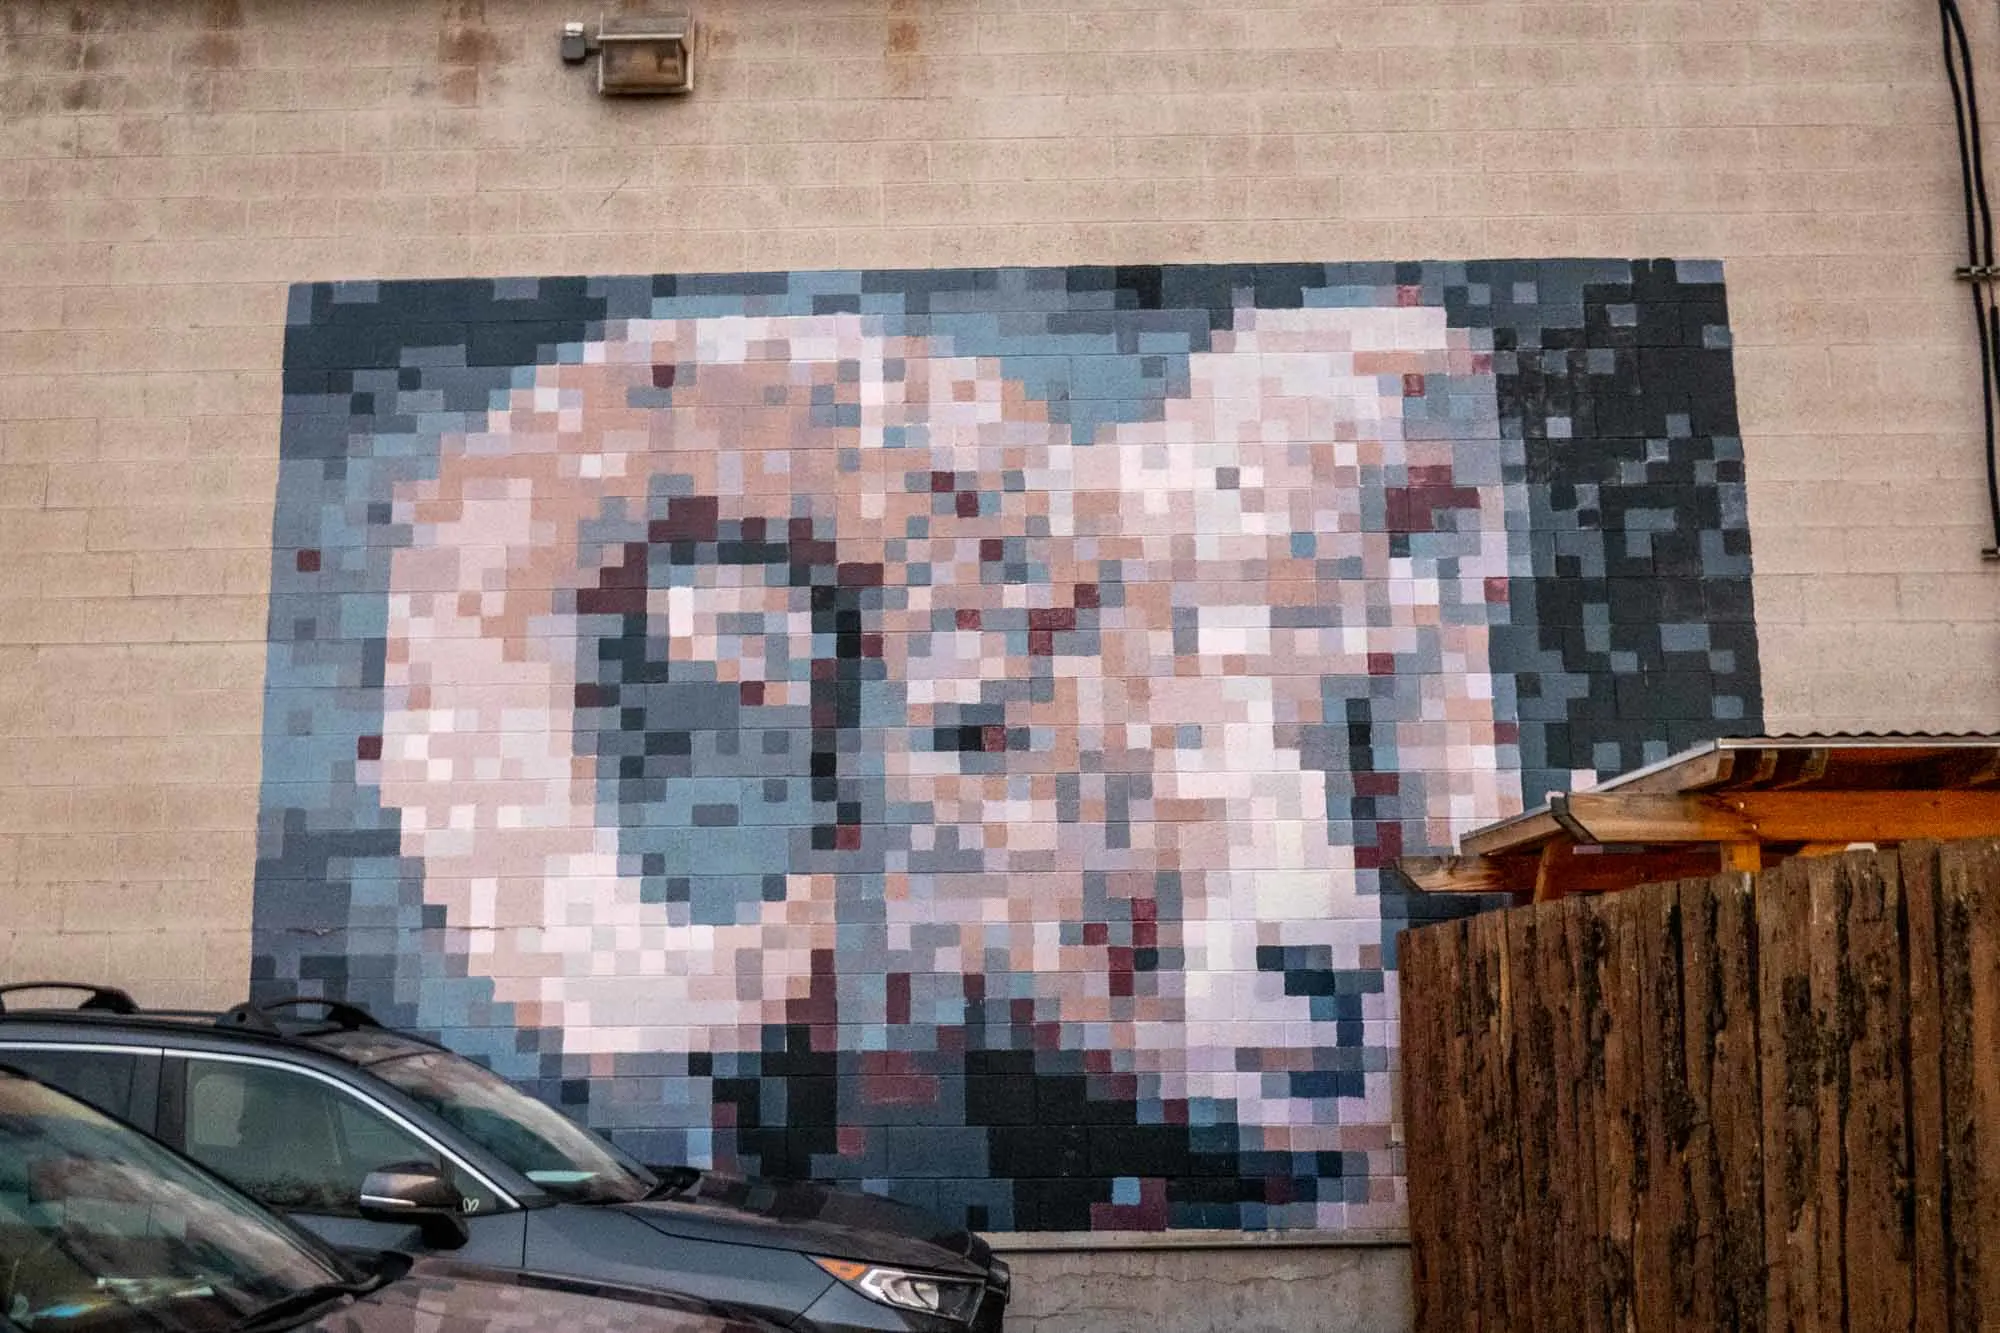 Pixelated mural of a rams head